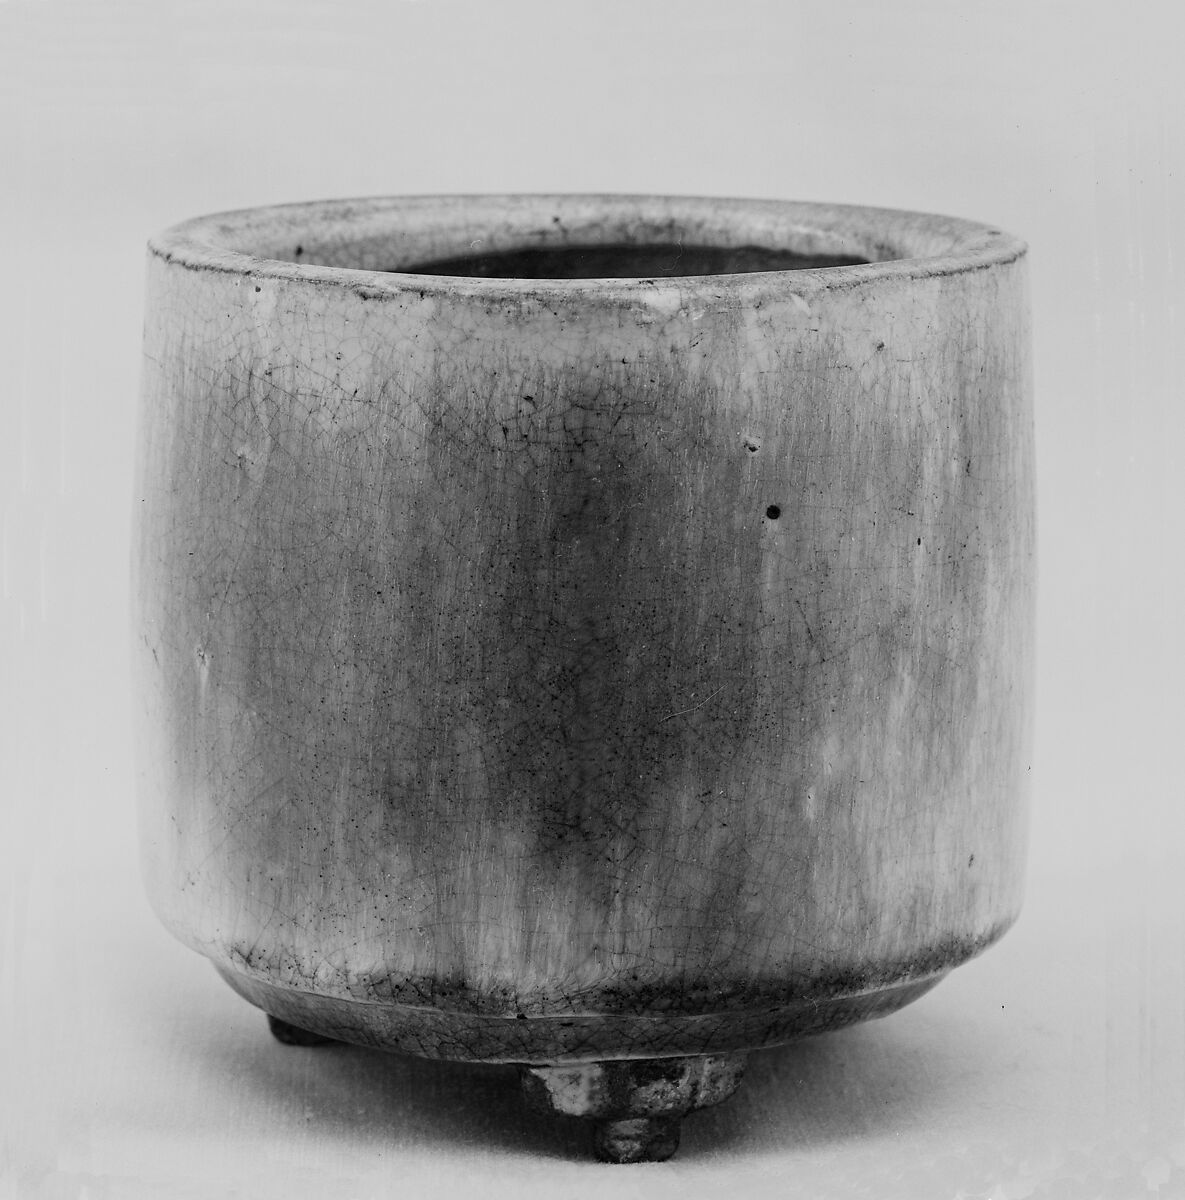 Fire Bowl, Clay covered with a transparent glaze, streaked with white (Kiyomizu ware), Japan 